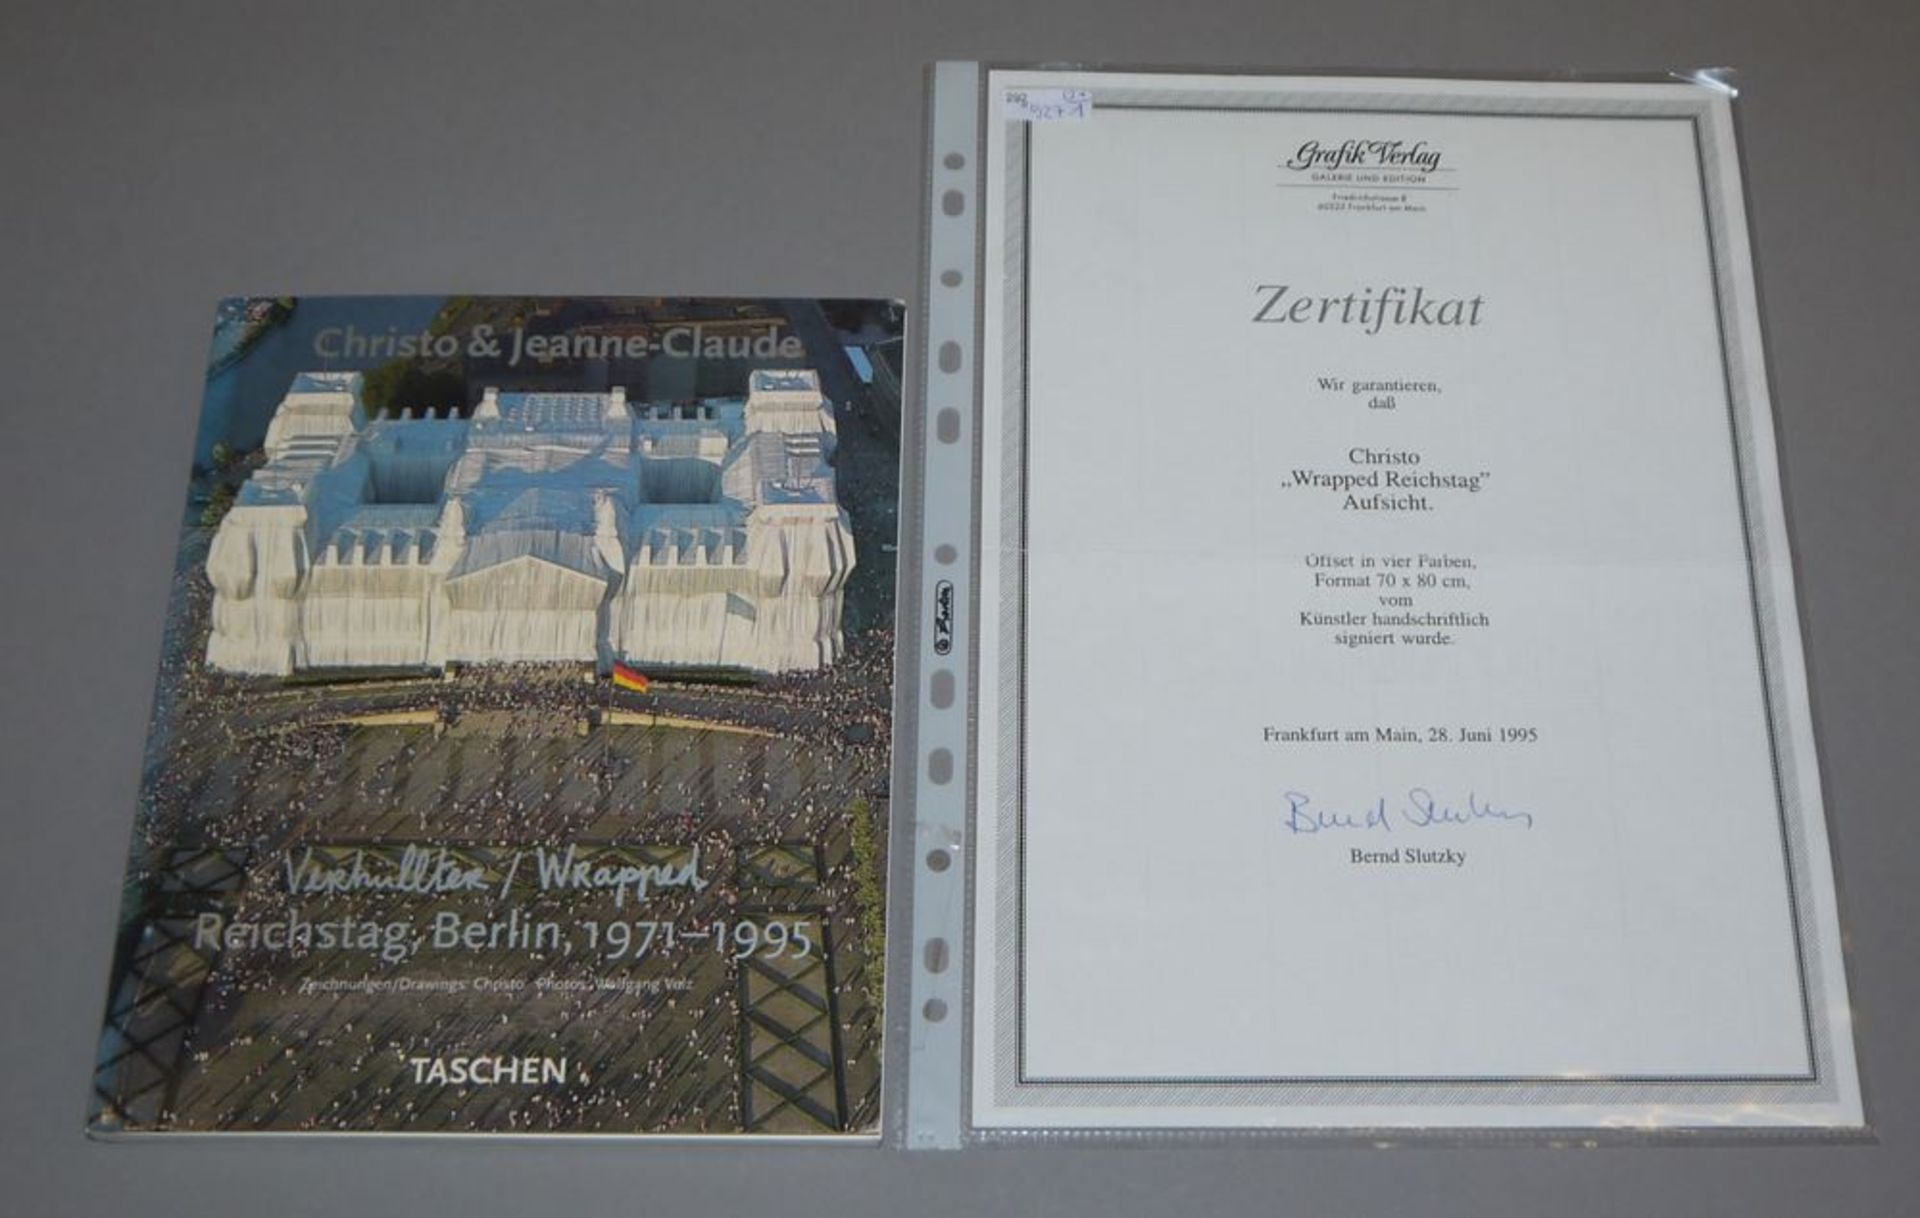 Christo & Jeanne-Claude, "Wrapped Reichstag", signed colour offset print, 1995 - Image 3 of 3